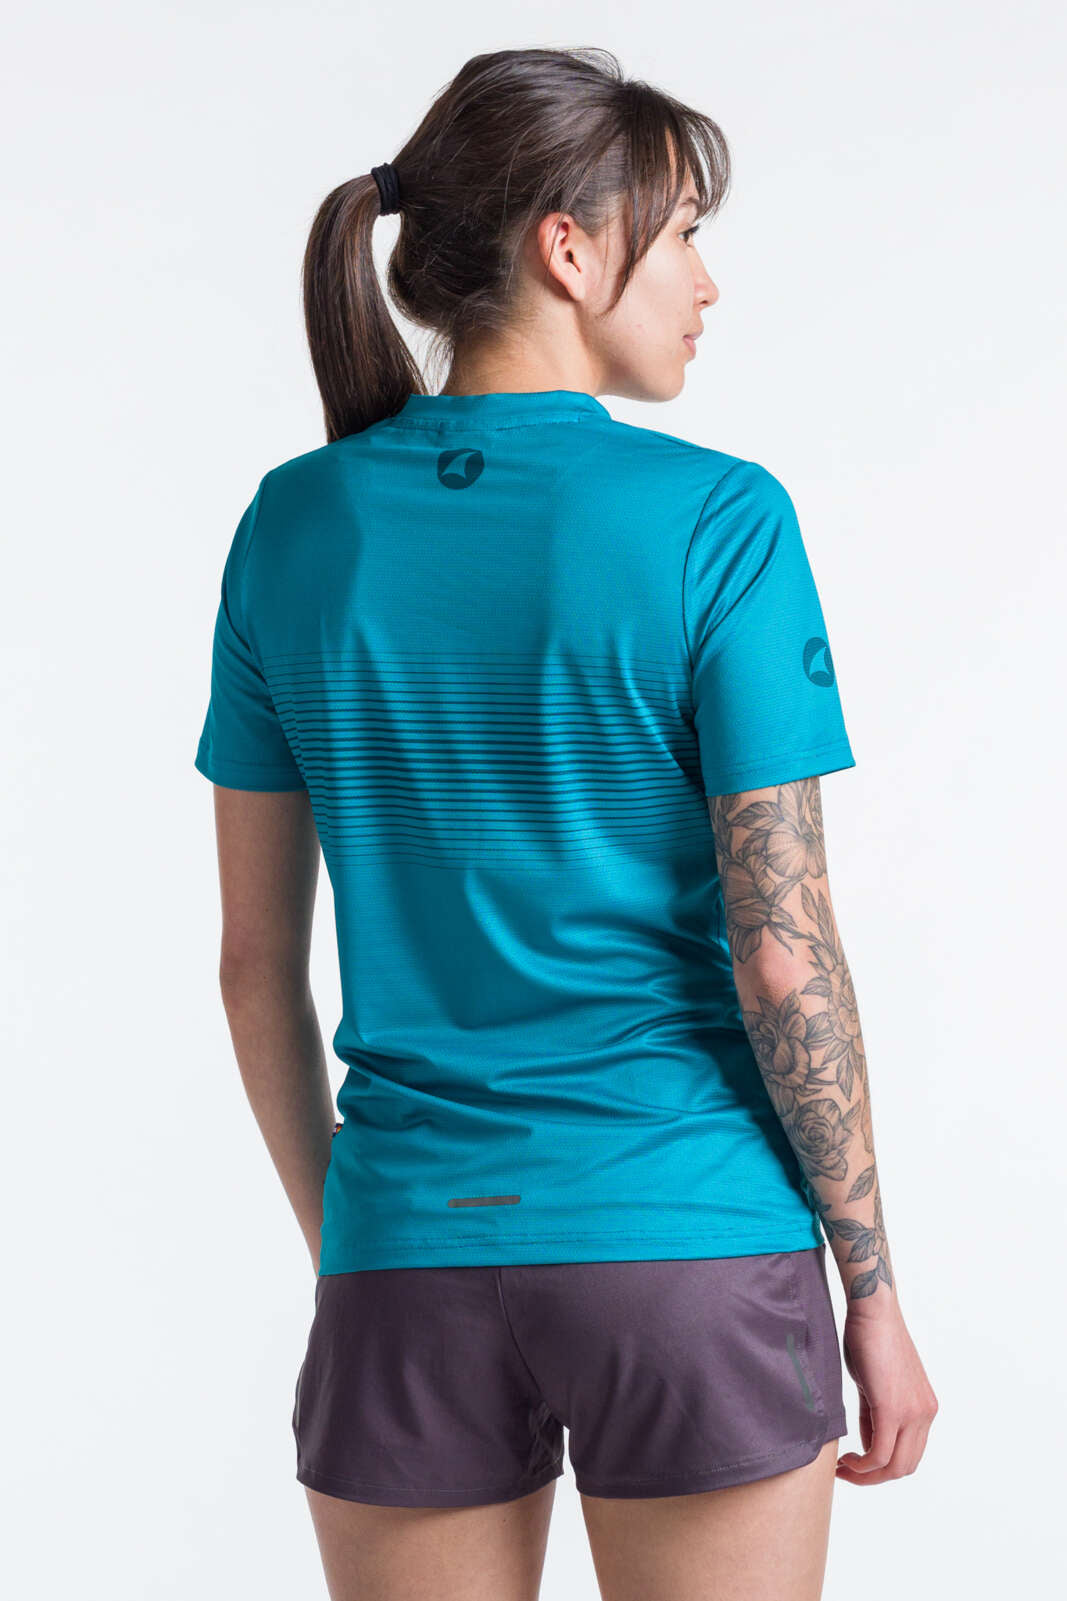 Women\'s Teal Running Shirt | Breathable & Lightweight | Pactimo